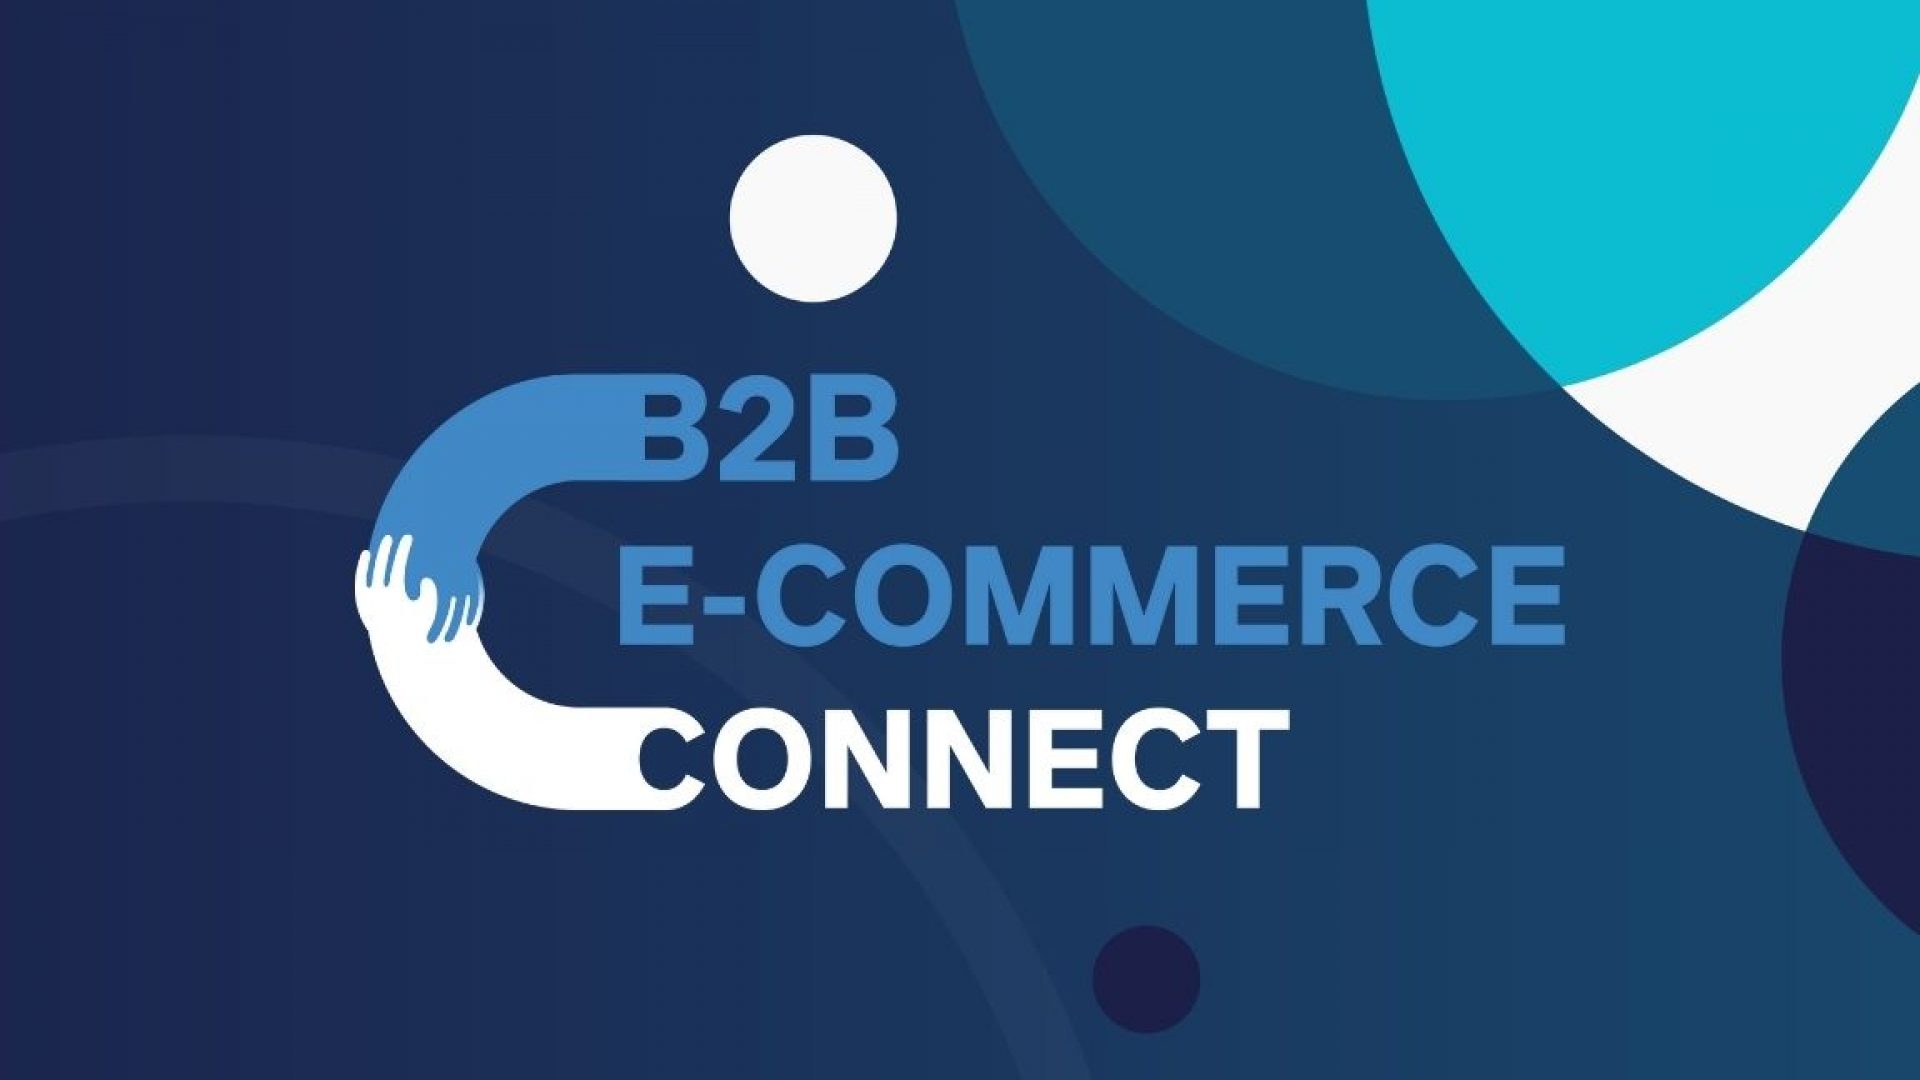 B2B E-Commerce Connect Overview Logo